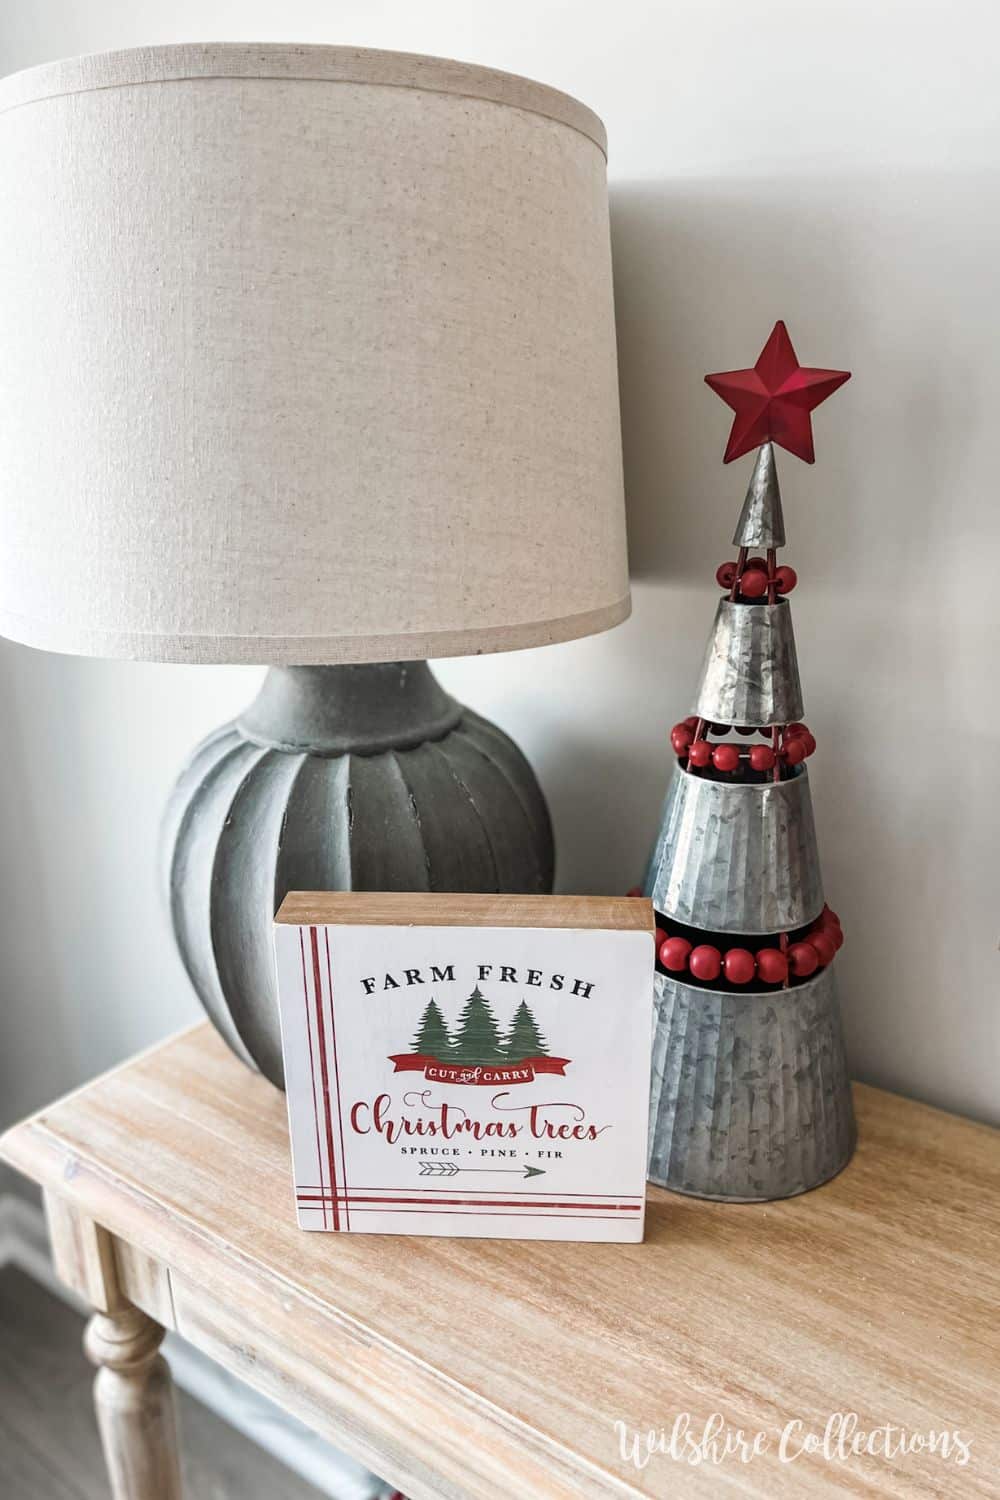 Festive Christmas ideas using red, white and gray